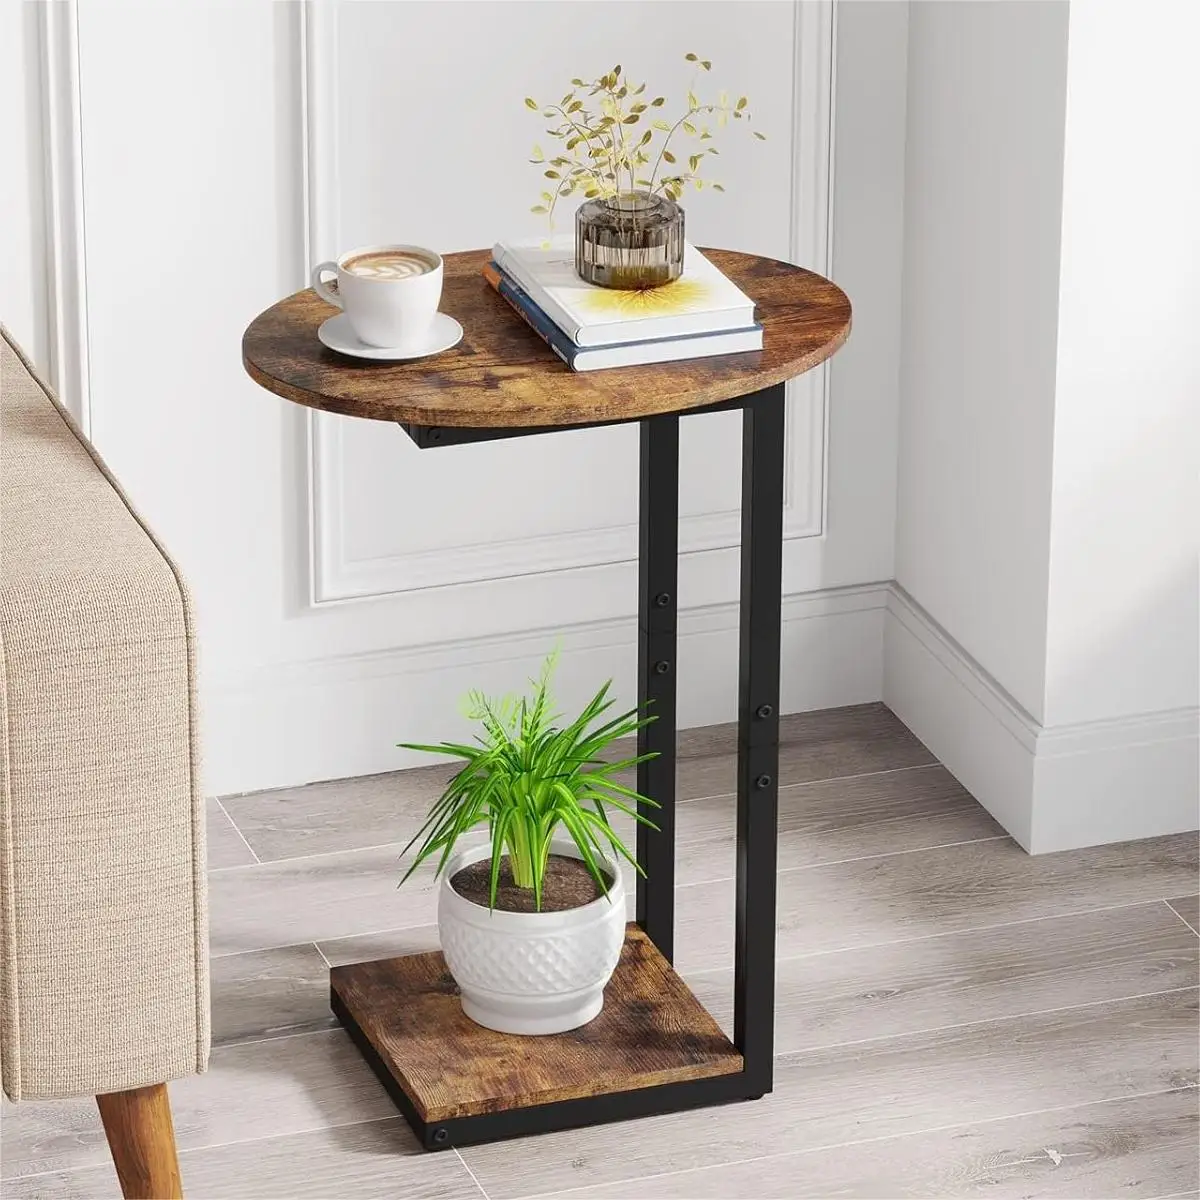 Side Table Small End Table: C-Shaped Wood Sofa Table with Metal Frame for Living Room, Bedroom, Small Spaces (Rustic Brown)